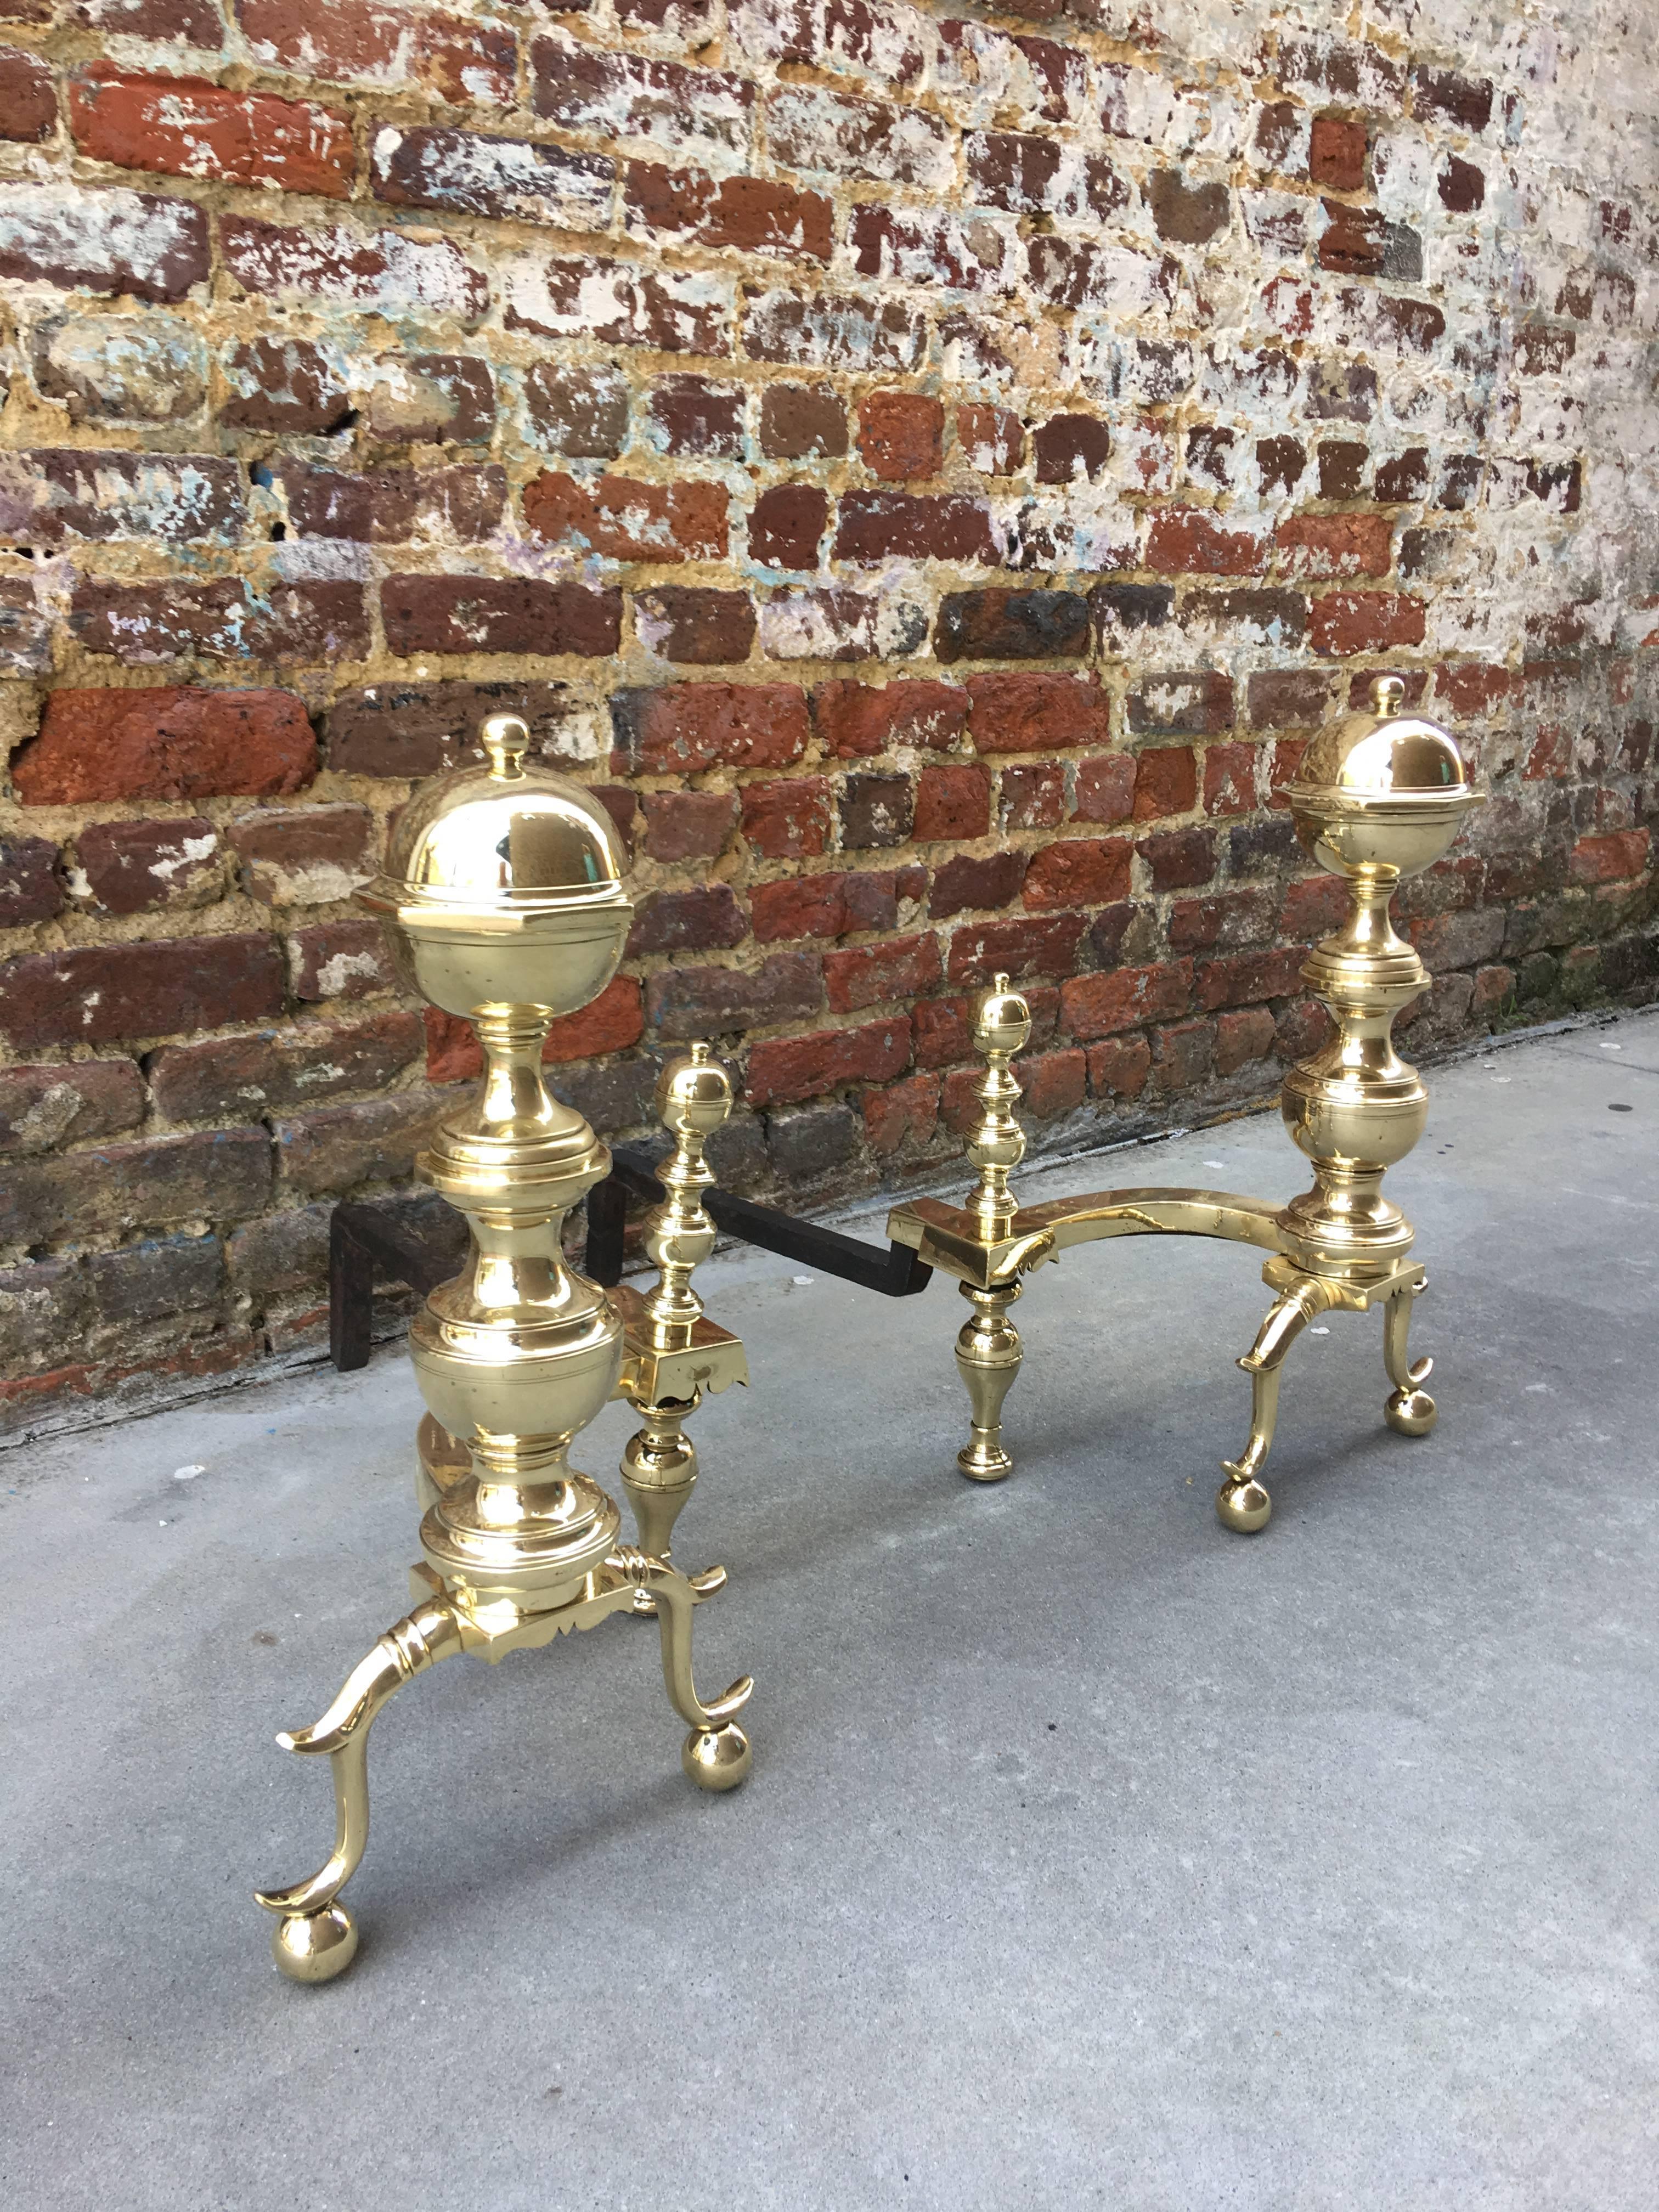 Pair of brass andirons with large log stops, mid-19th century.